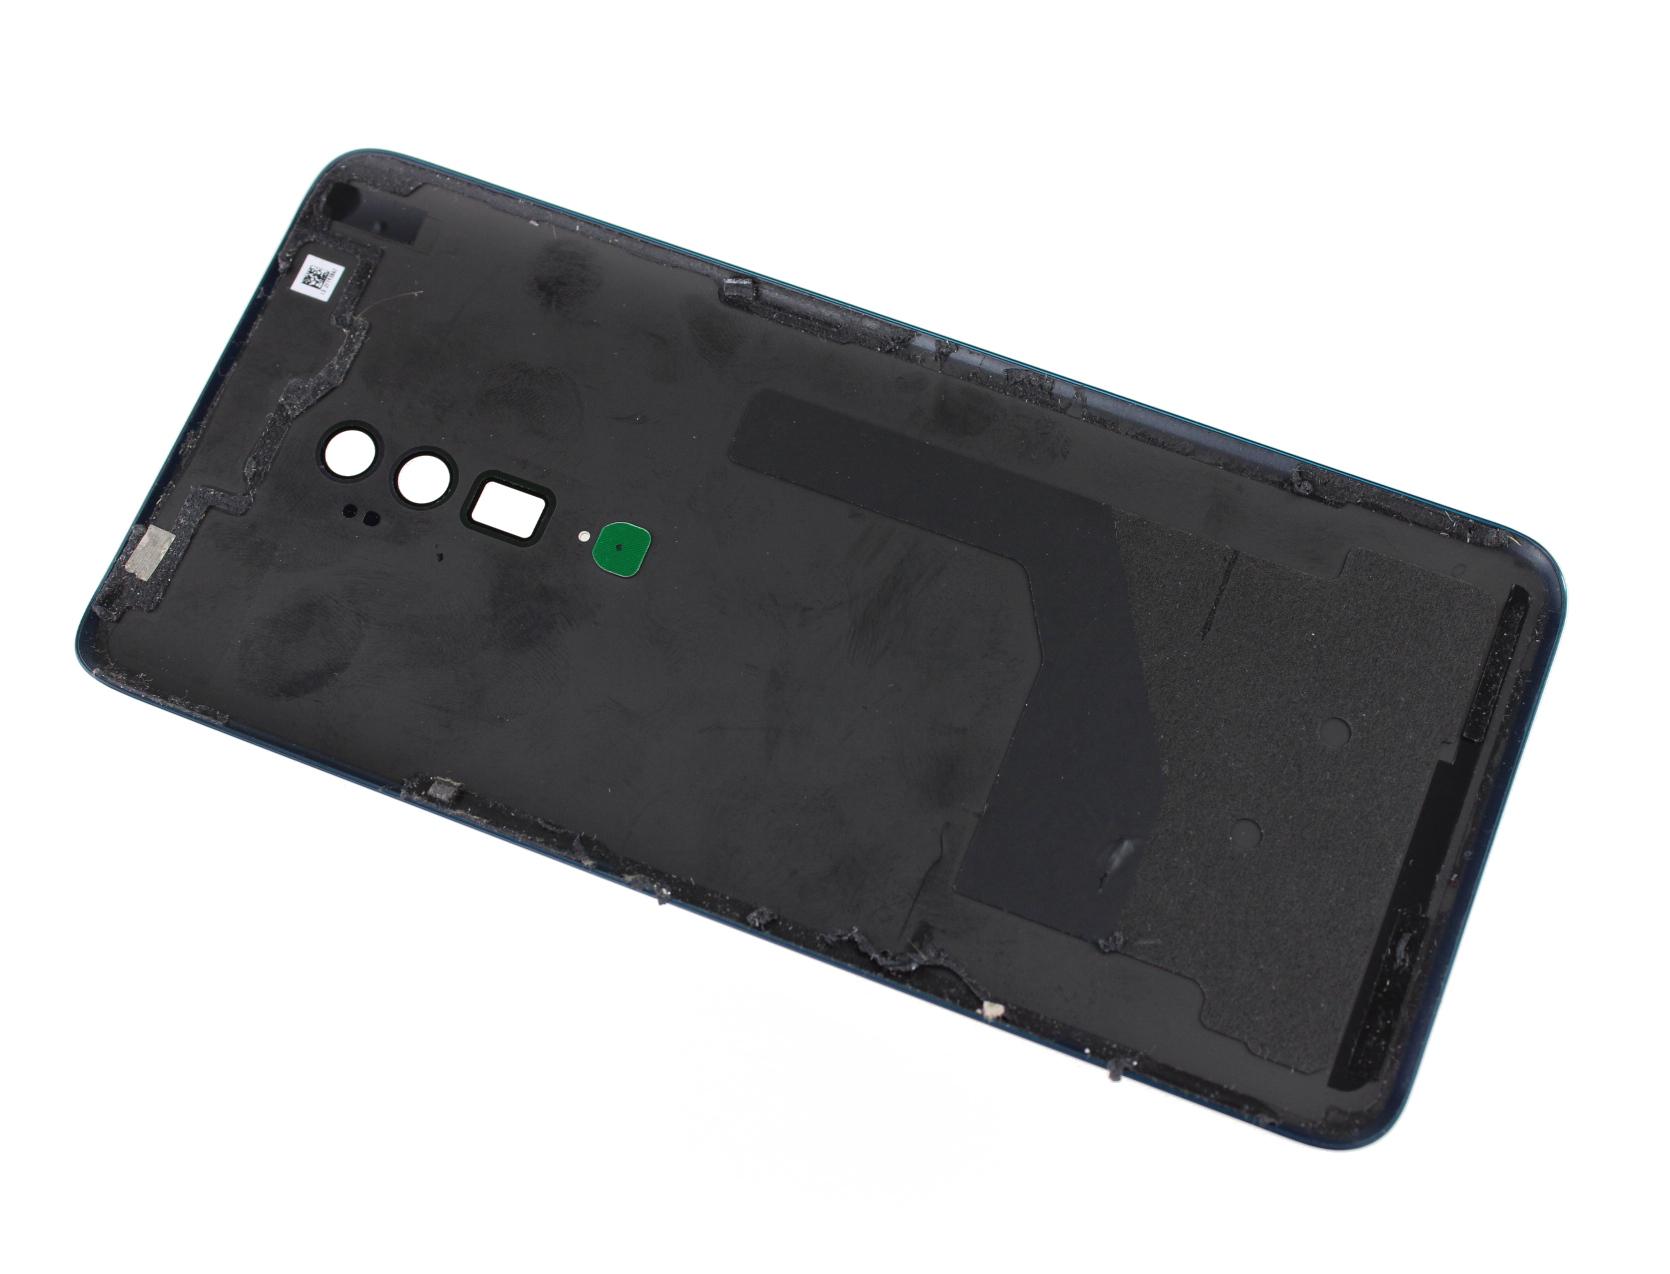 Original battery cover Oppo Reno 10x zoom green (disassembly)